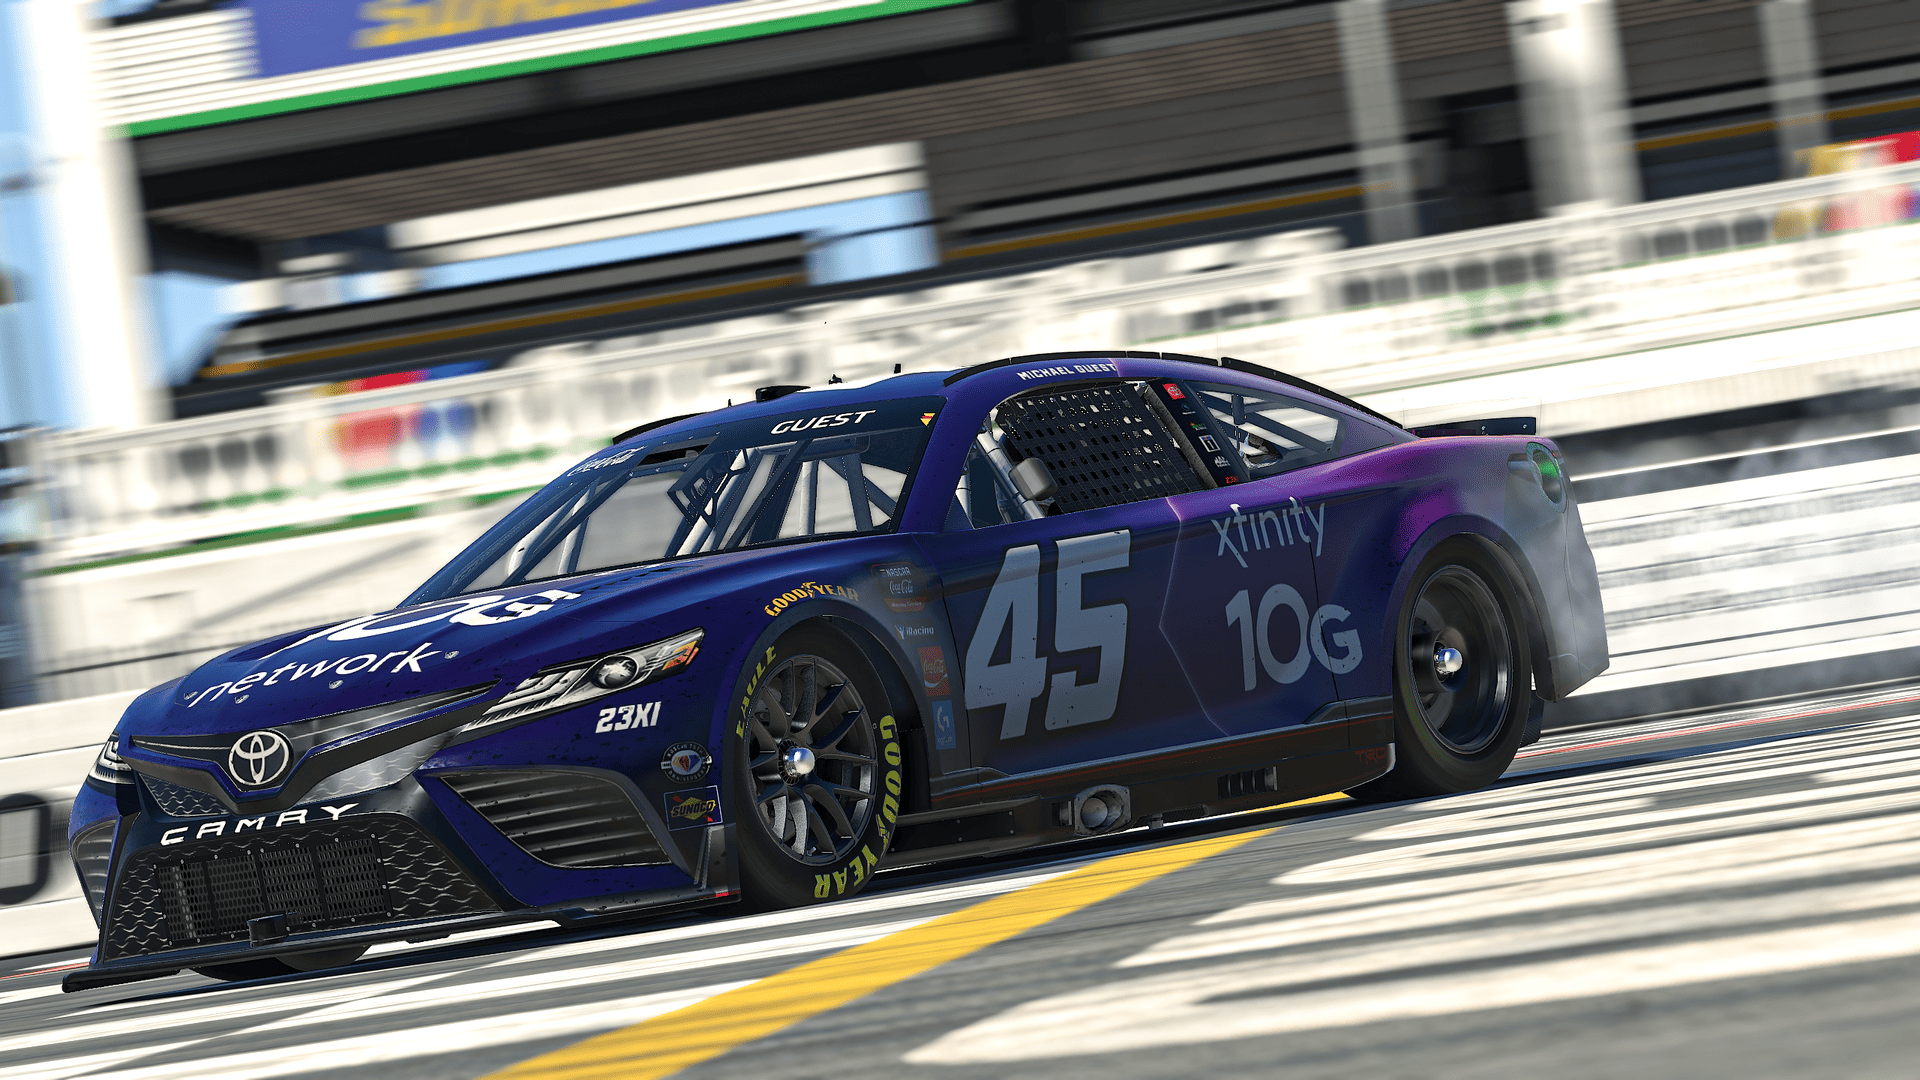 Michael Guest earned his first career eNASCAR Coca-Cola iRacing Series victory and punched his ticket to NASCAR's esports playoffs.